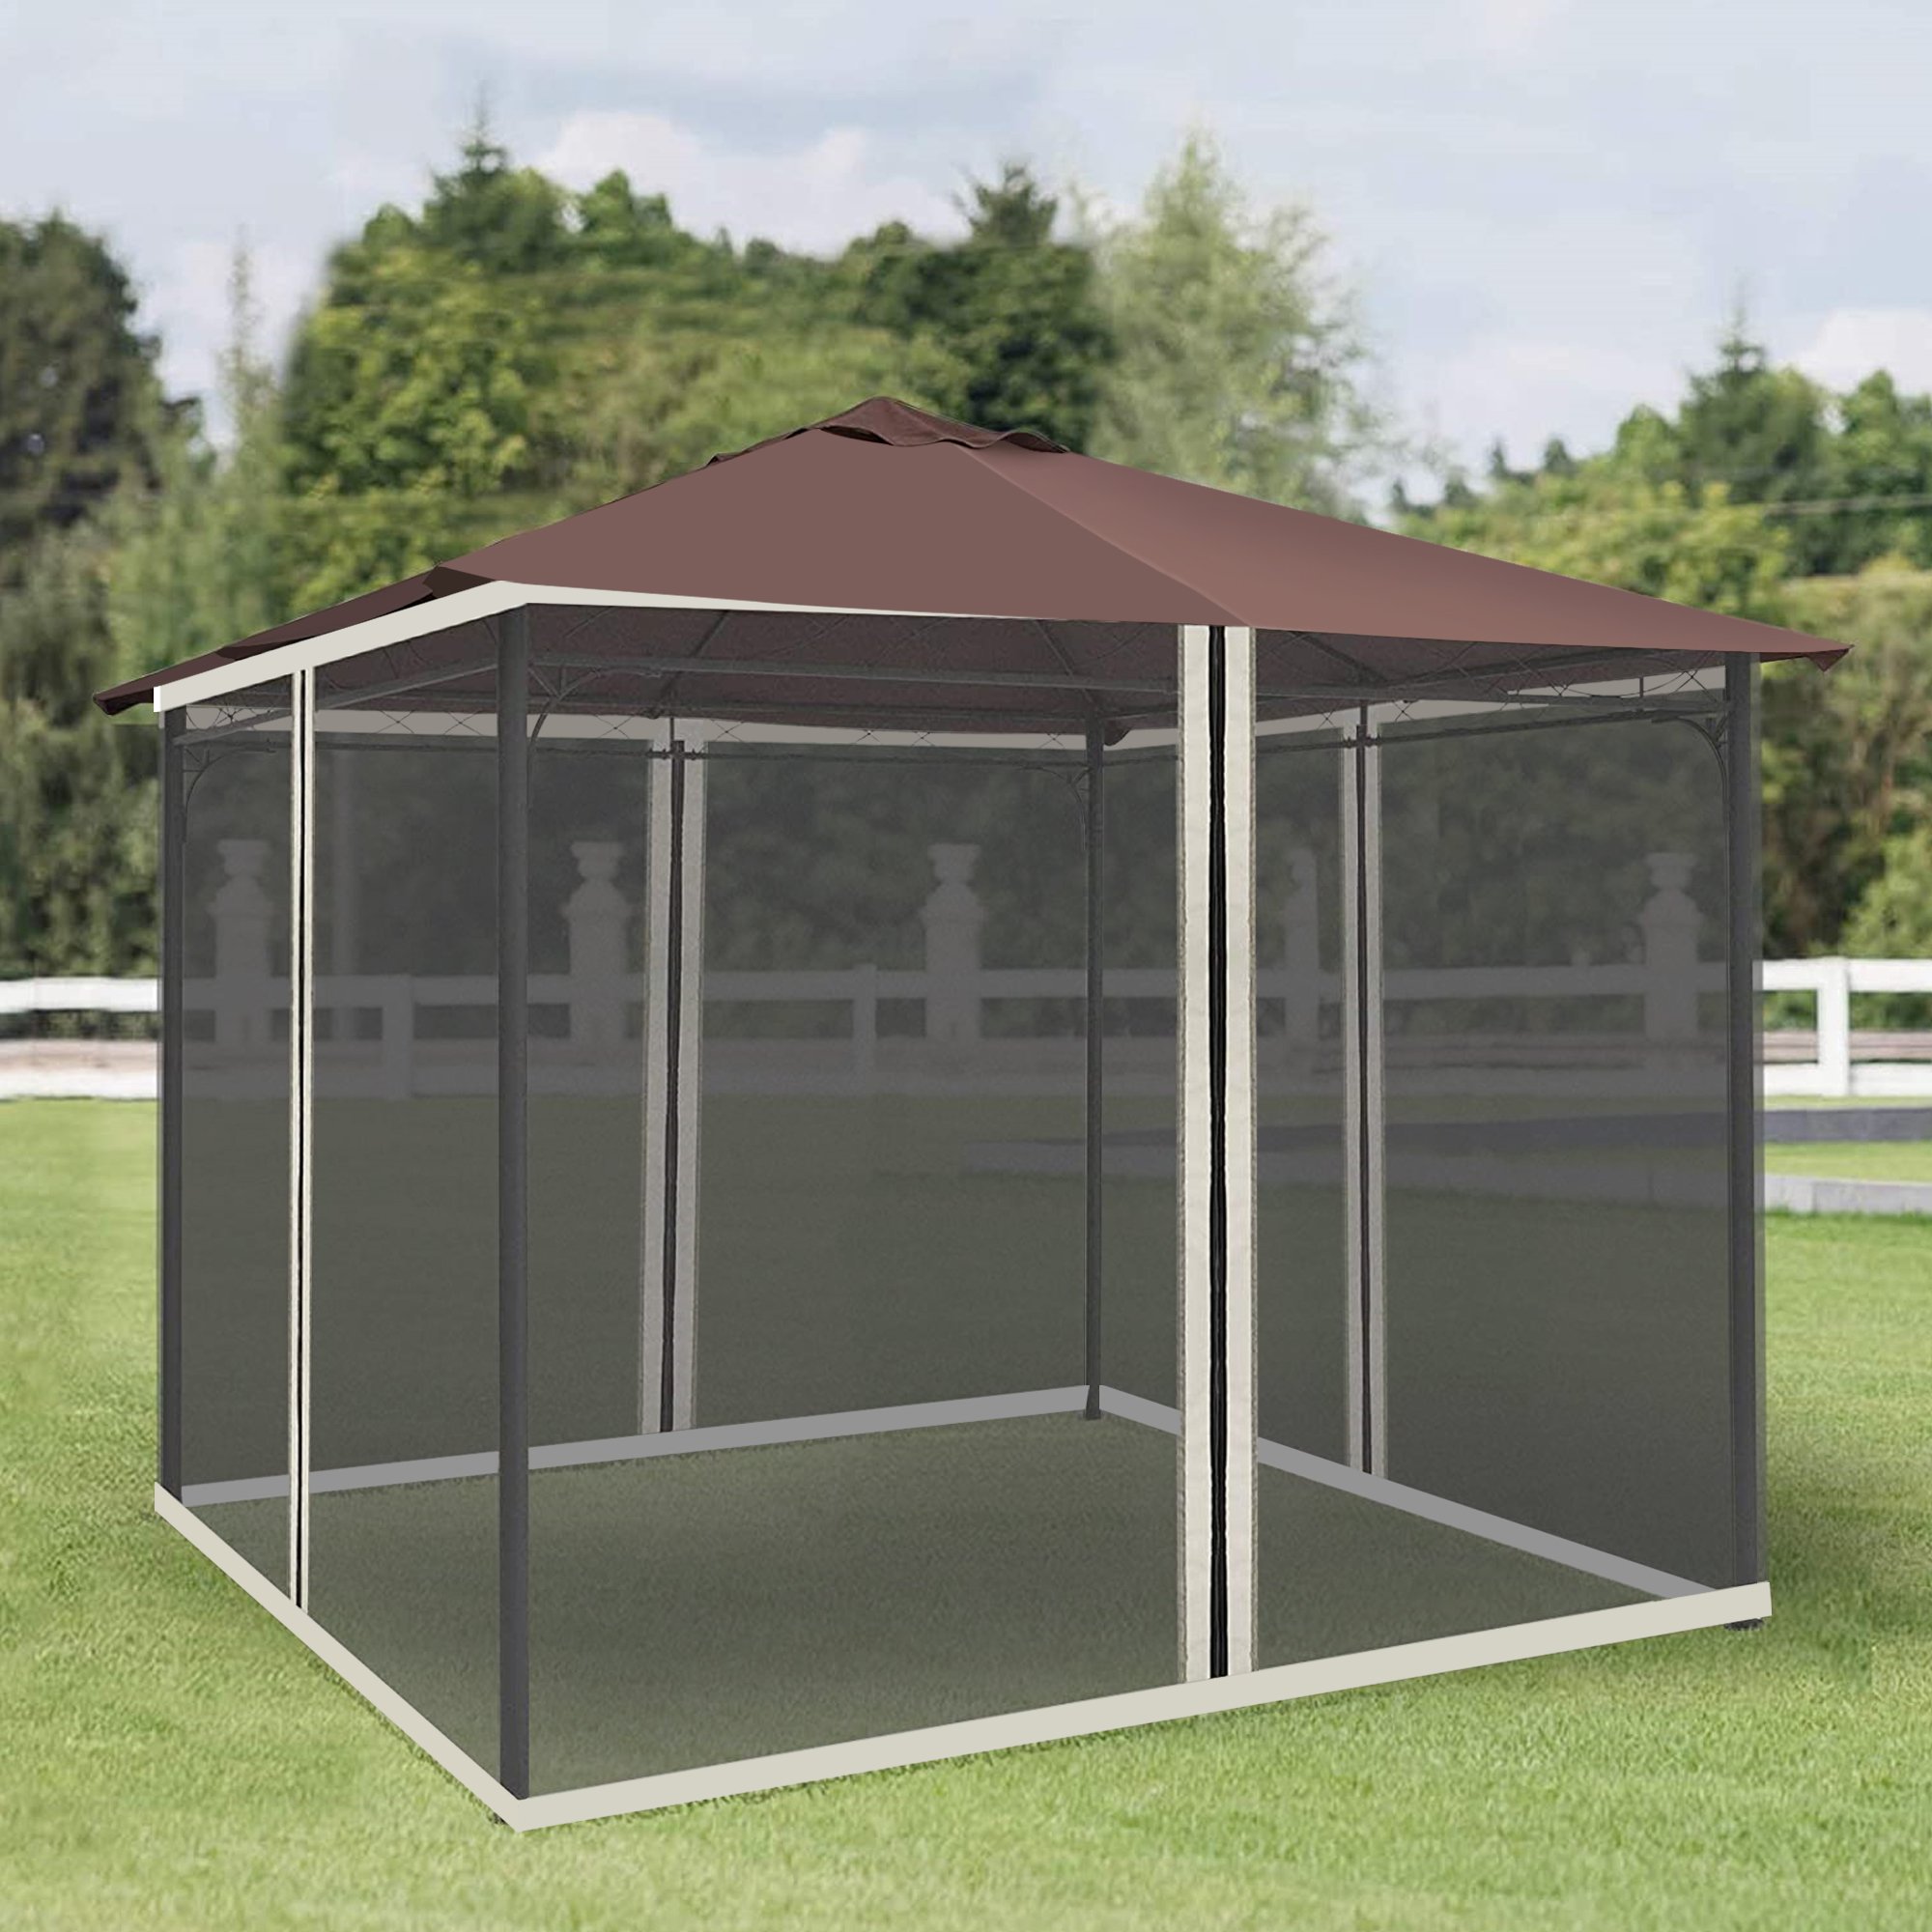 Outsunny Replacement Mesh Mosquito Netting Screen Walls for 10' x 12' Patio Gazebo,4-panel Sidewalls with Zippers (Wall Only, Canopy Not Included)